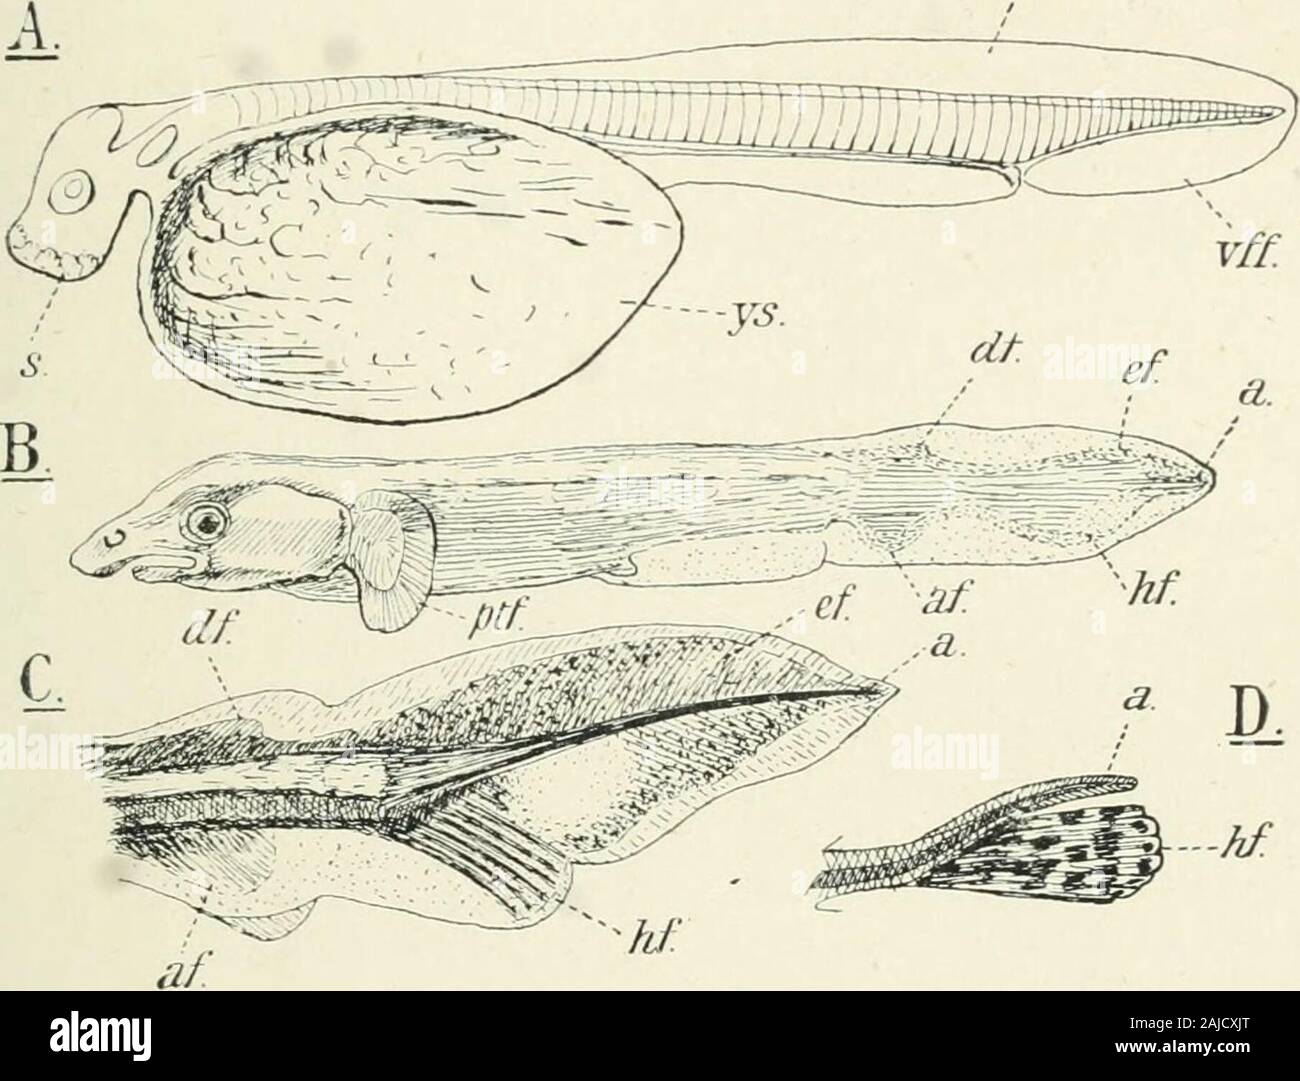 A treatise on zoology . Fic. CO. Successive stages in the development of tliehomocercal tail of the Flounder, Plearonectes flesiis,L., siiowing the disappearance of the axial lobe, c,and growth of the hypochordal fin, h.f. ac, actino-trichia ; h.a, liaemal arch ; hy, hypural cartilage ; /,dermal ray; n.sp, neural spine ; nt, notocliord.(After A. Agassiz.) MEDIAN FINS 105 type (p. 480). The name gephyrocorcal has been ai)plied to thesepseiido-diphycercal tails. Turniii--- now to the relation between the axial and the appen-dicular skefeton of the median fins, which has already been alludedto ab Stock Photo